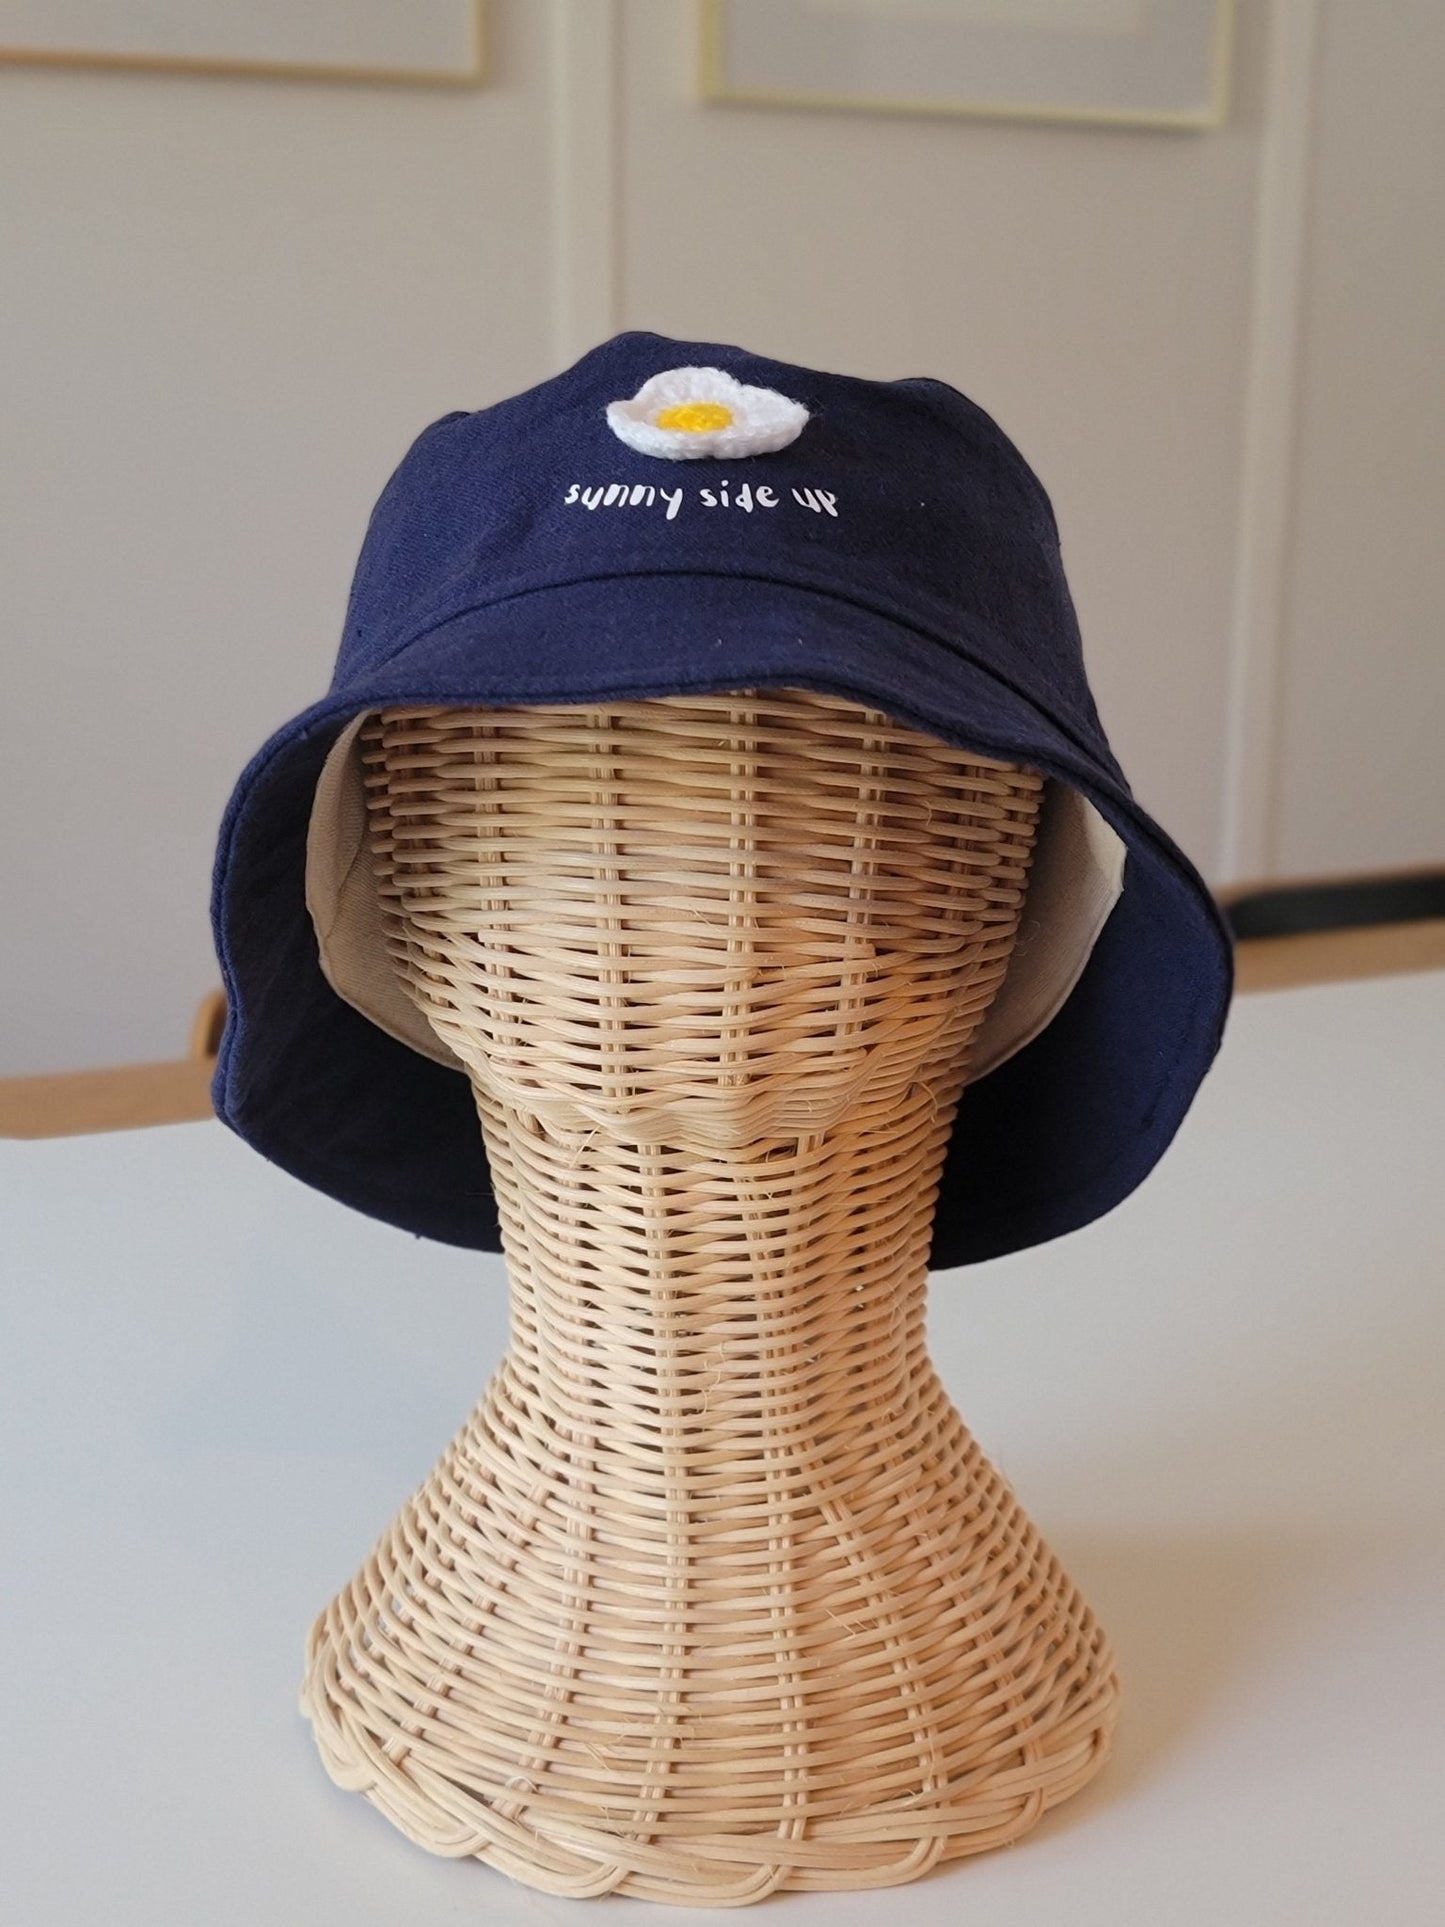 Bucket hat-Sunny side up-5